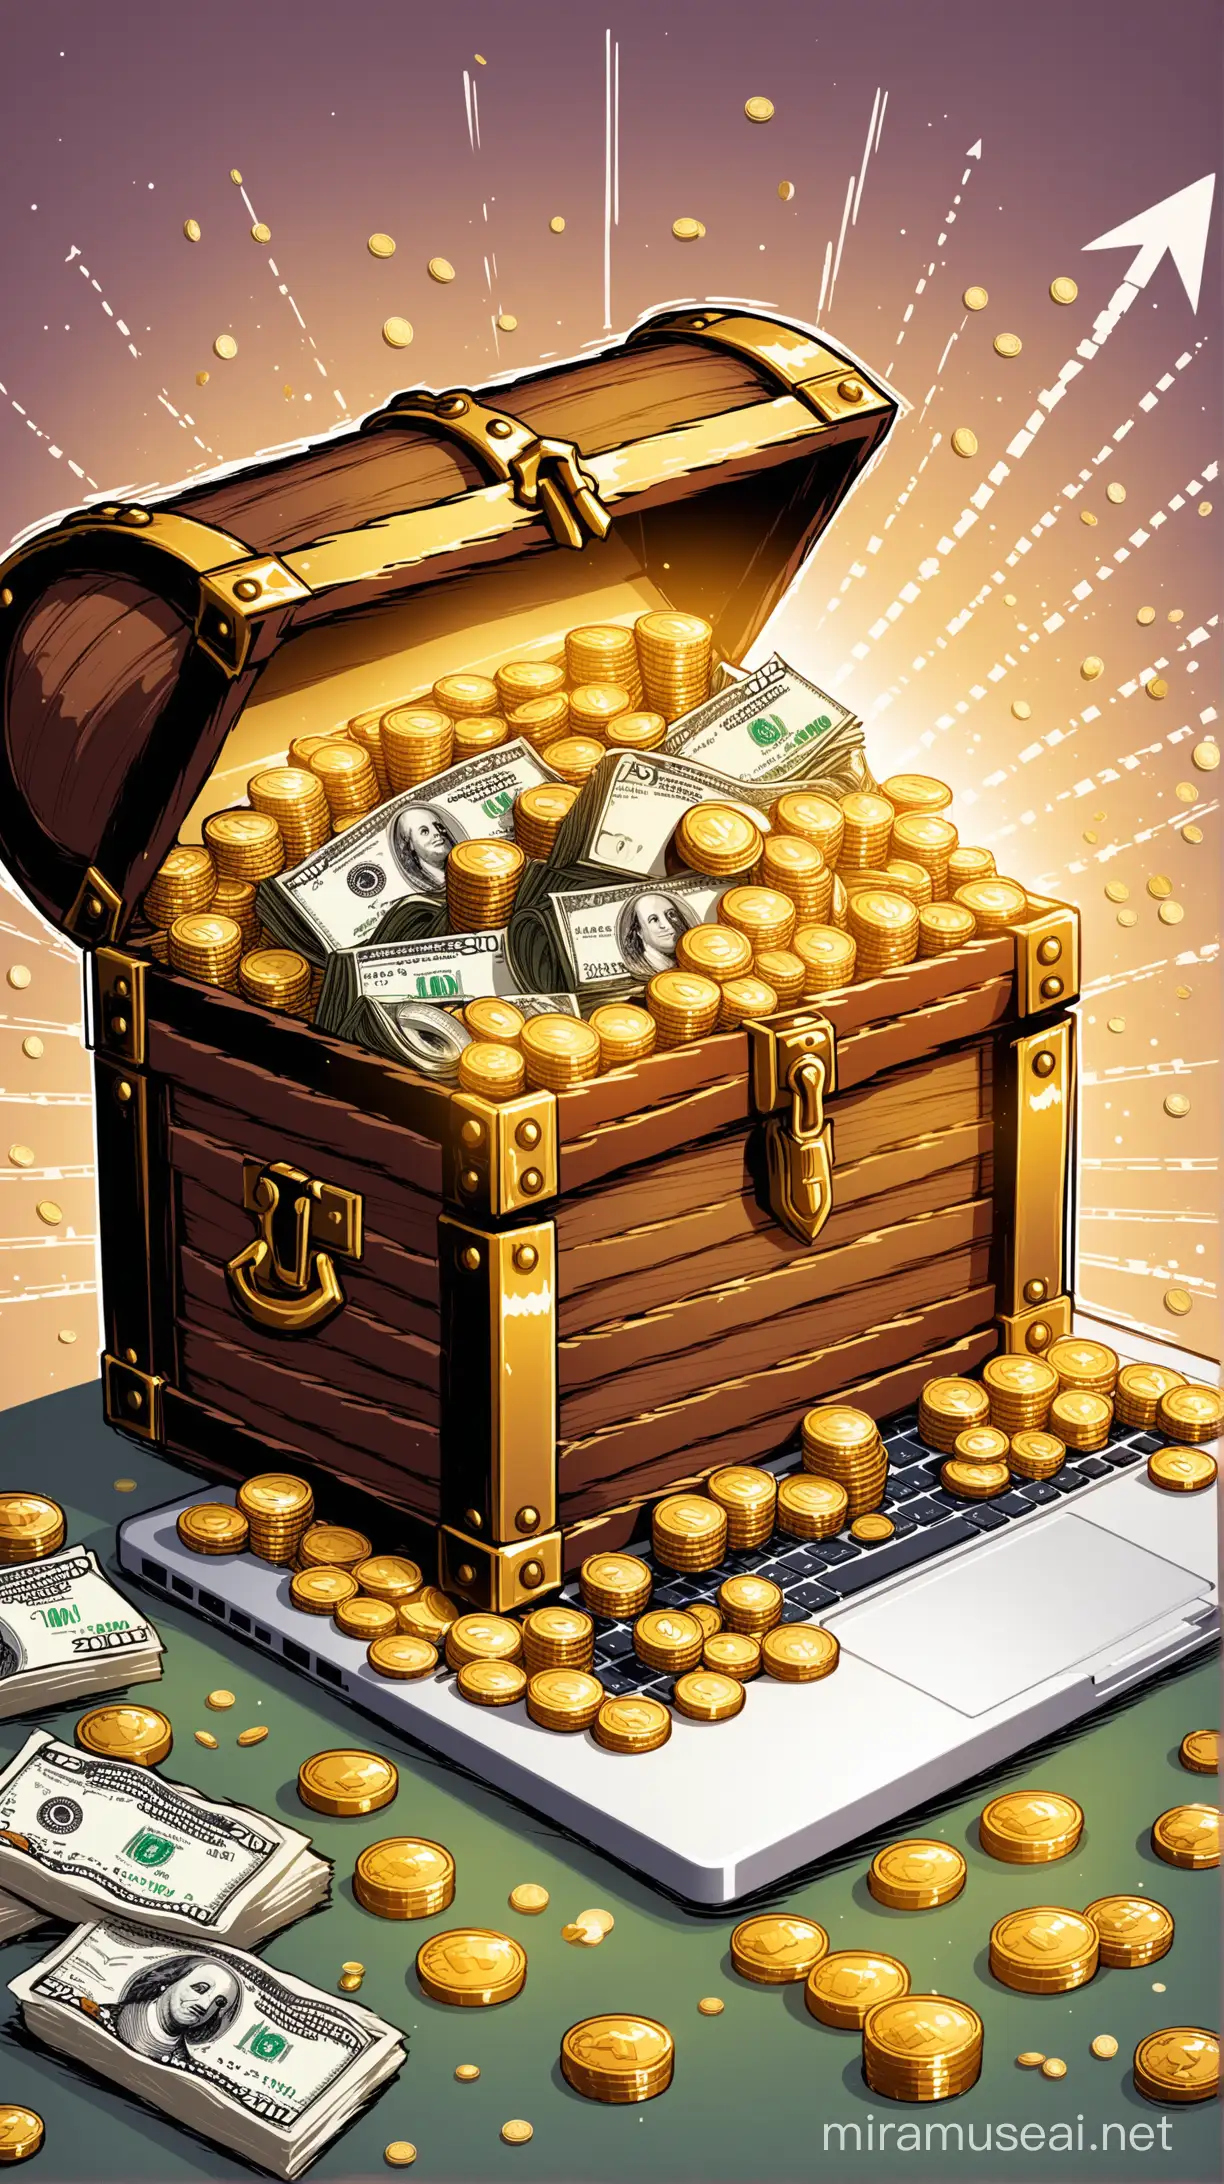 An illustration of a treasure chest overflowing with coins and dollar bills, with a laptop in the background displaying a graph showing upward growth.